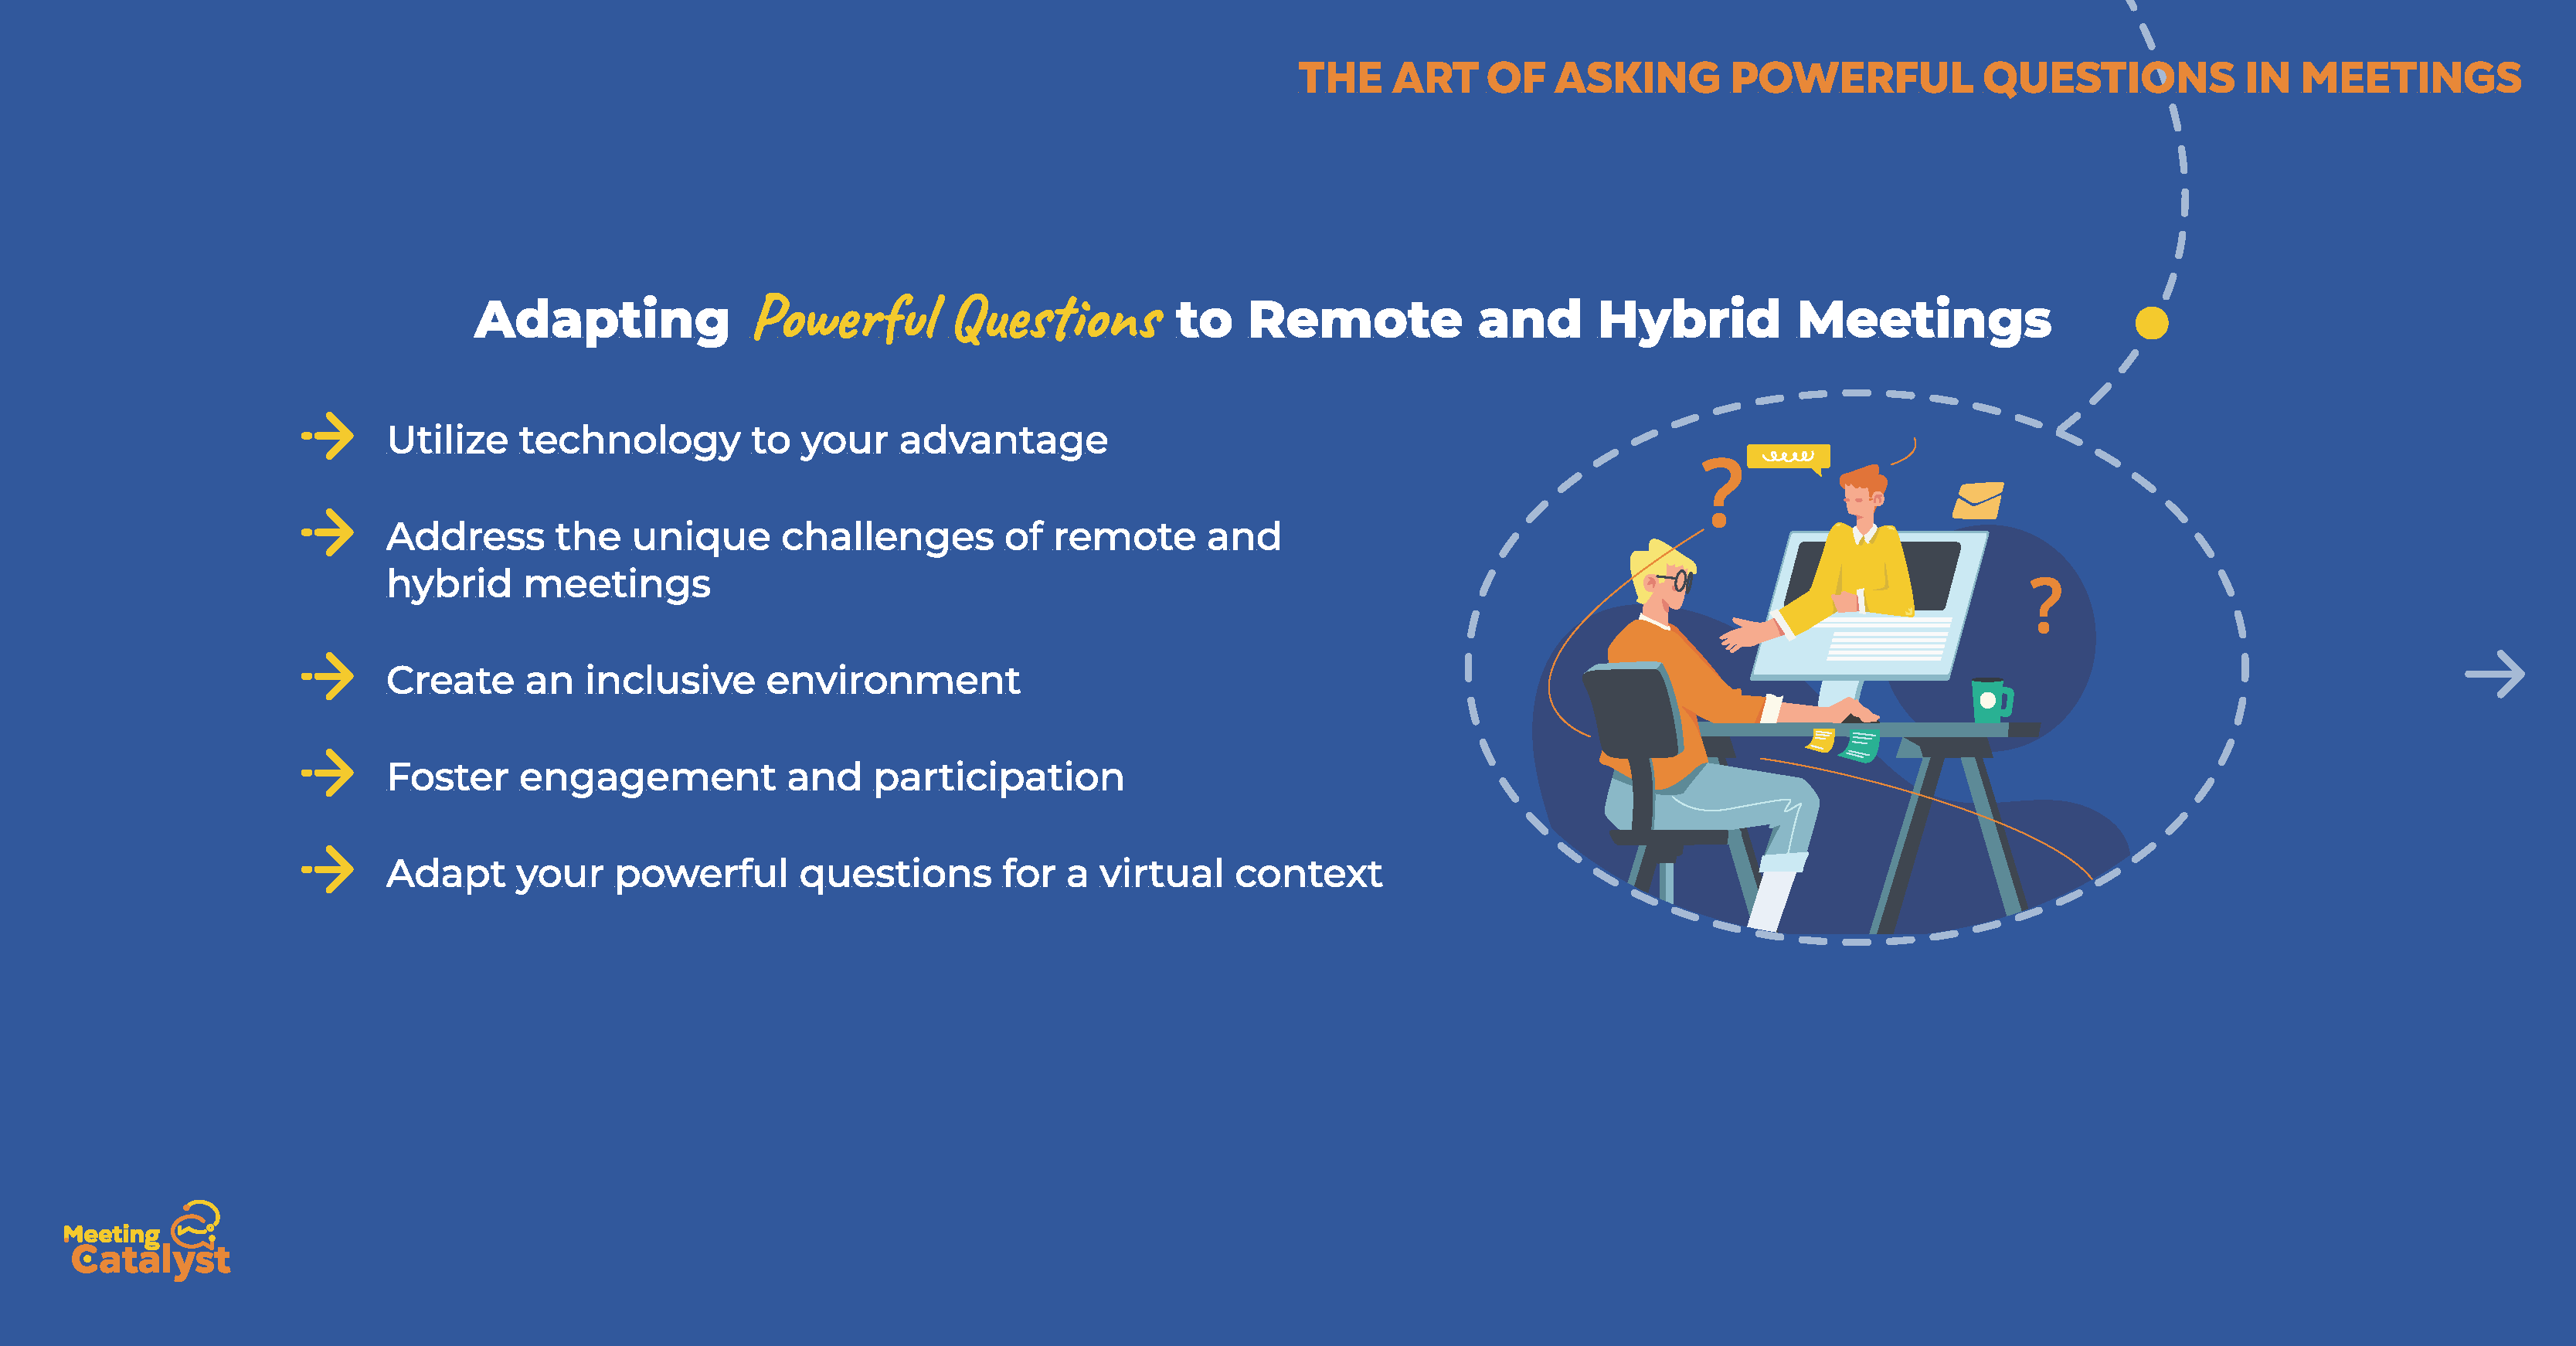 Infographic bullet points listing techniques to adapt powerful questions to remote and hybrid meetings